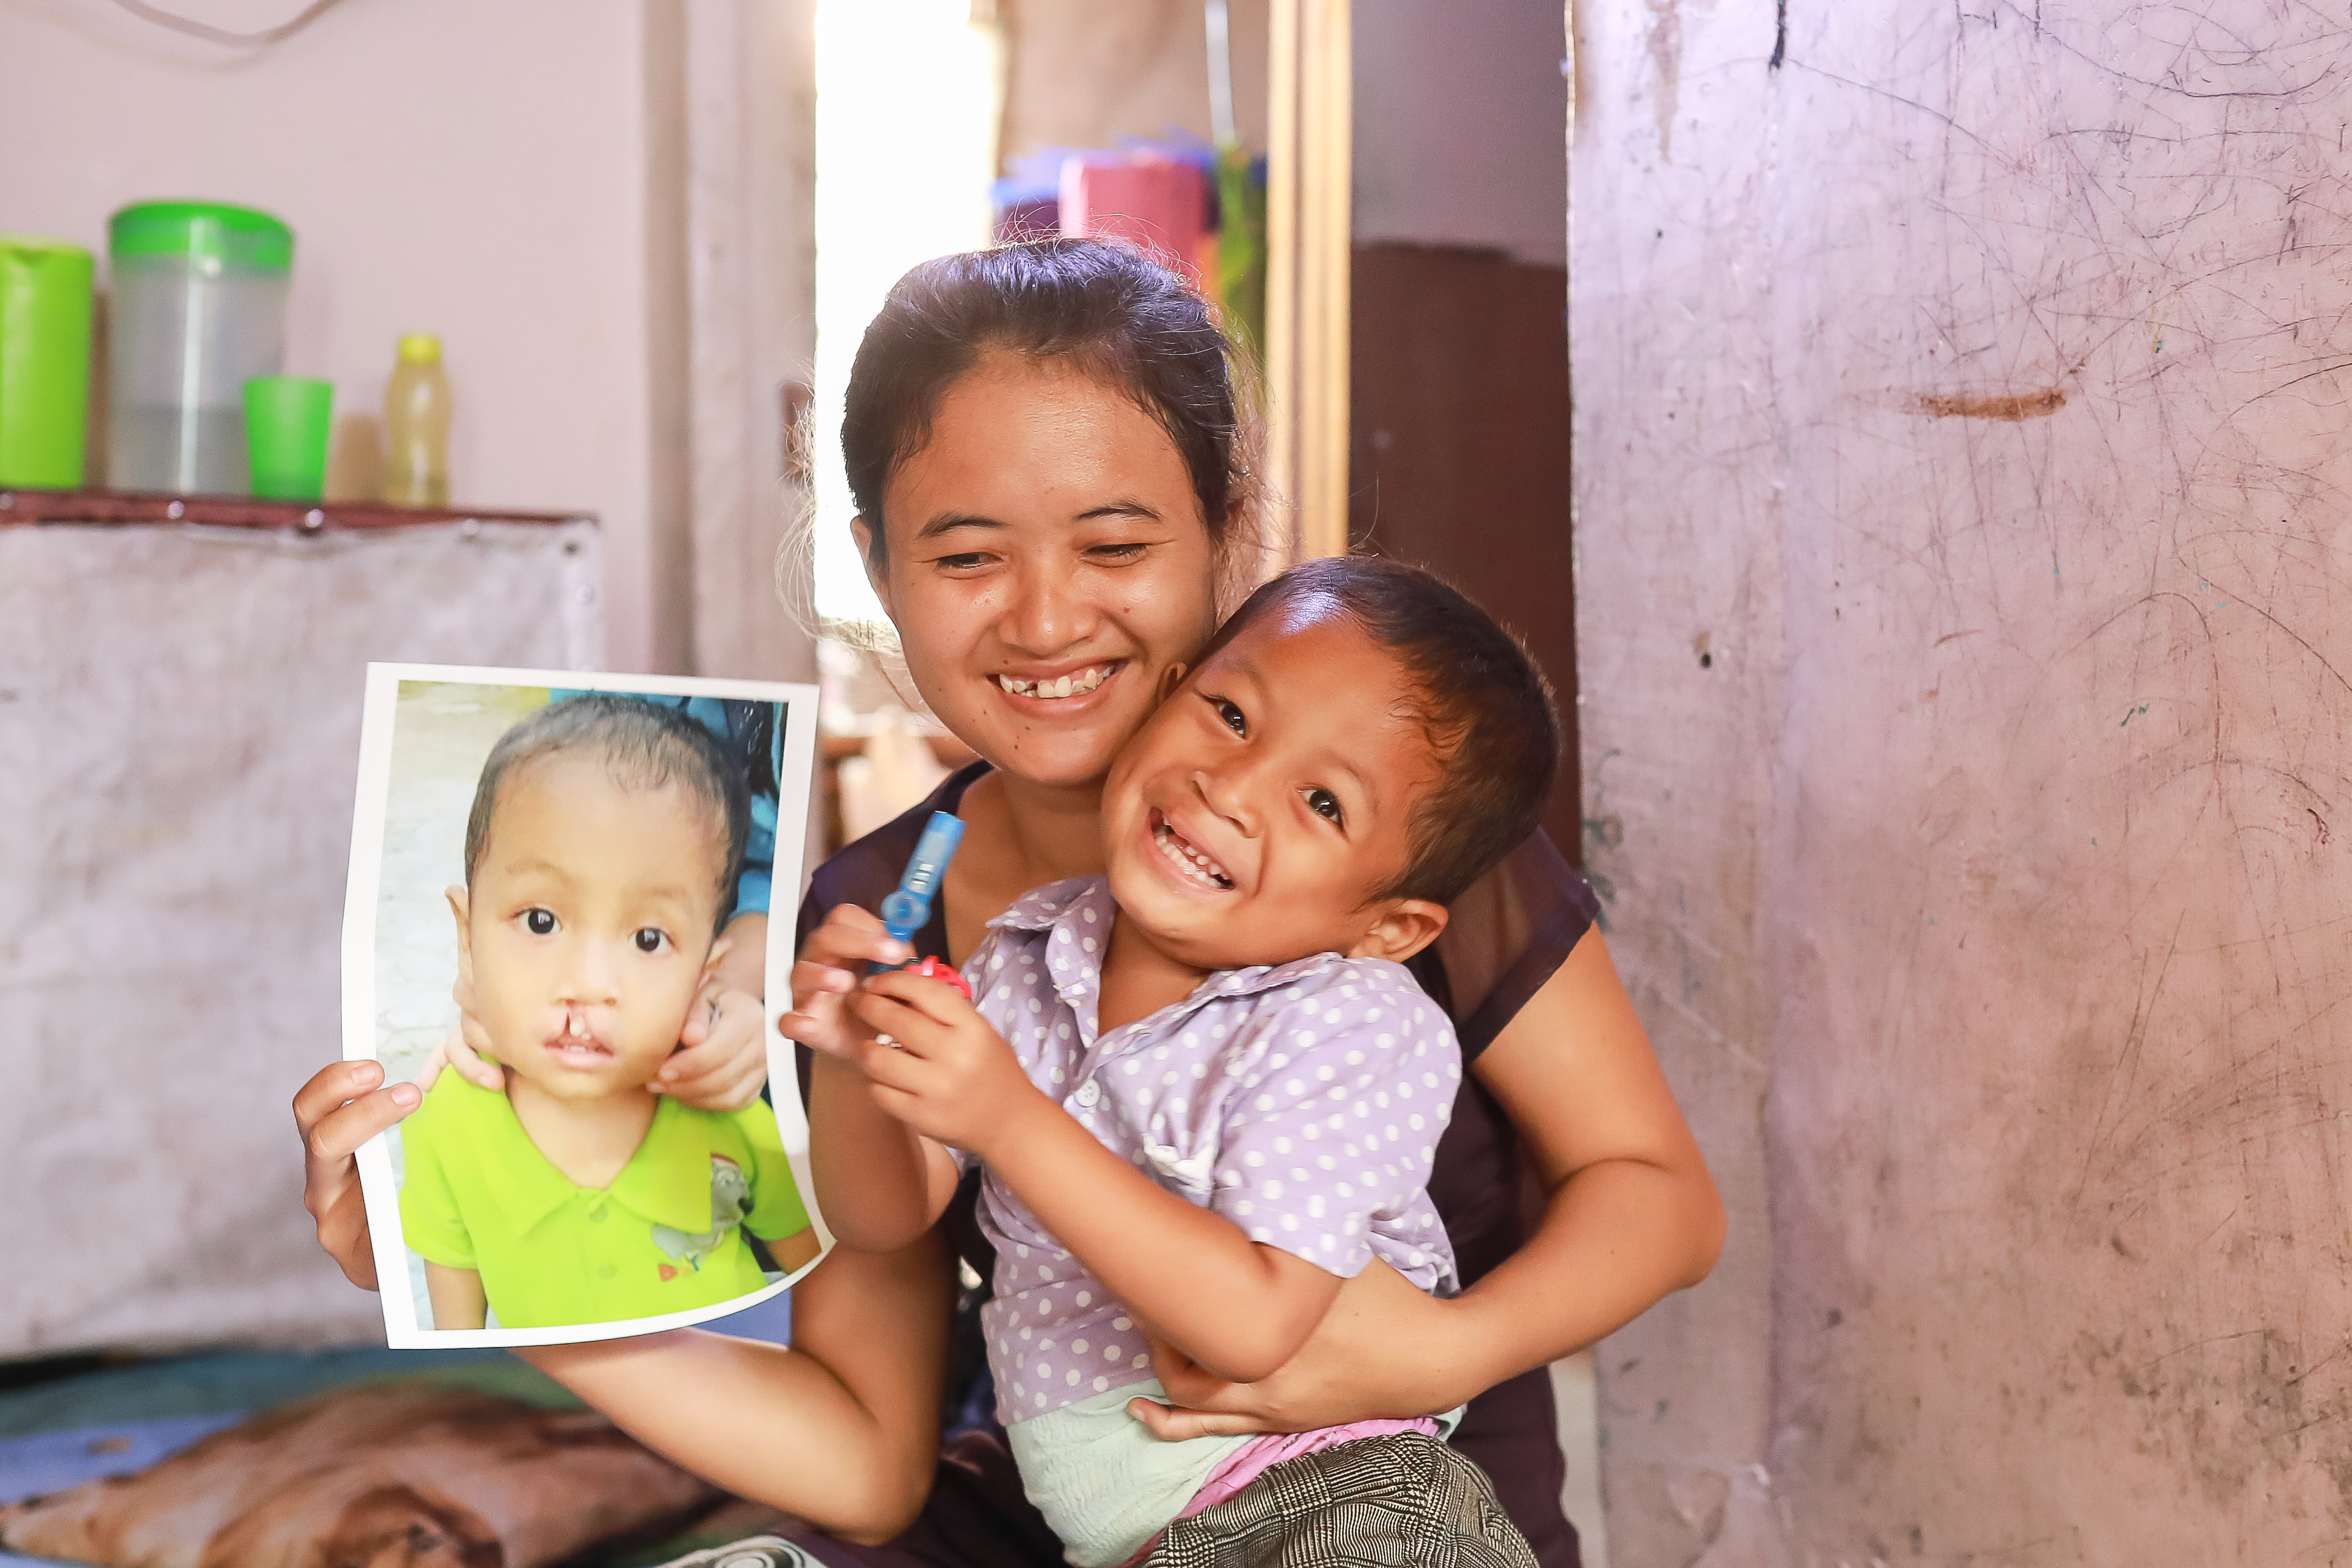 Darmawi smiling and holding her son Ikhsan and a picture of him before cleft surgery